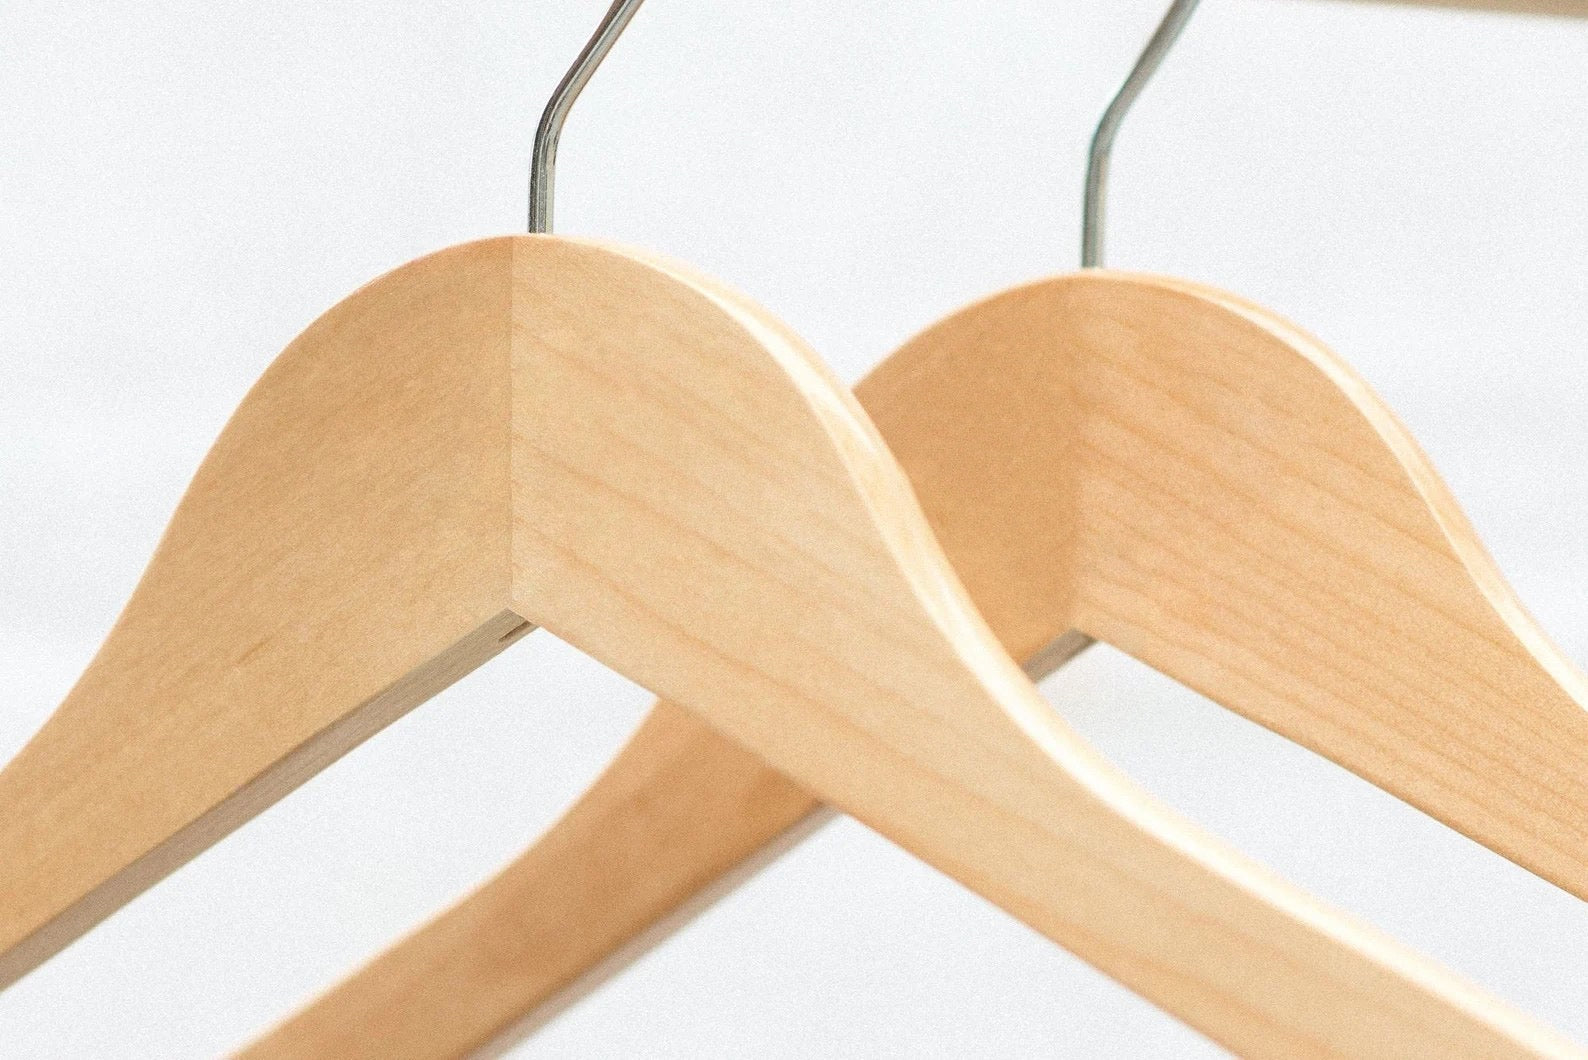 Two Wedding Quality Natural Maple Wooden Clothes Hangers with chrome hooks for custom hanger designers